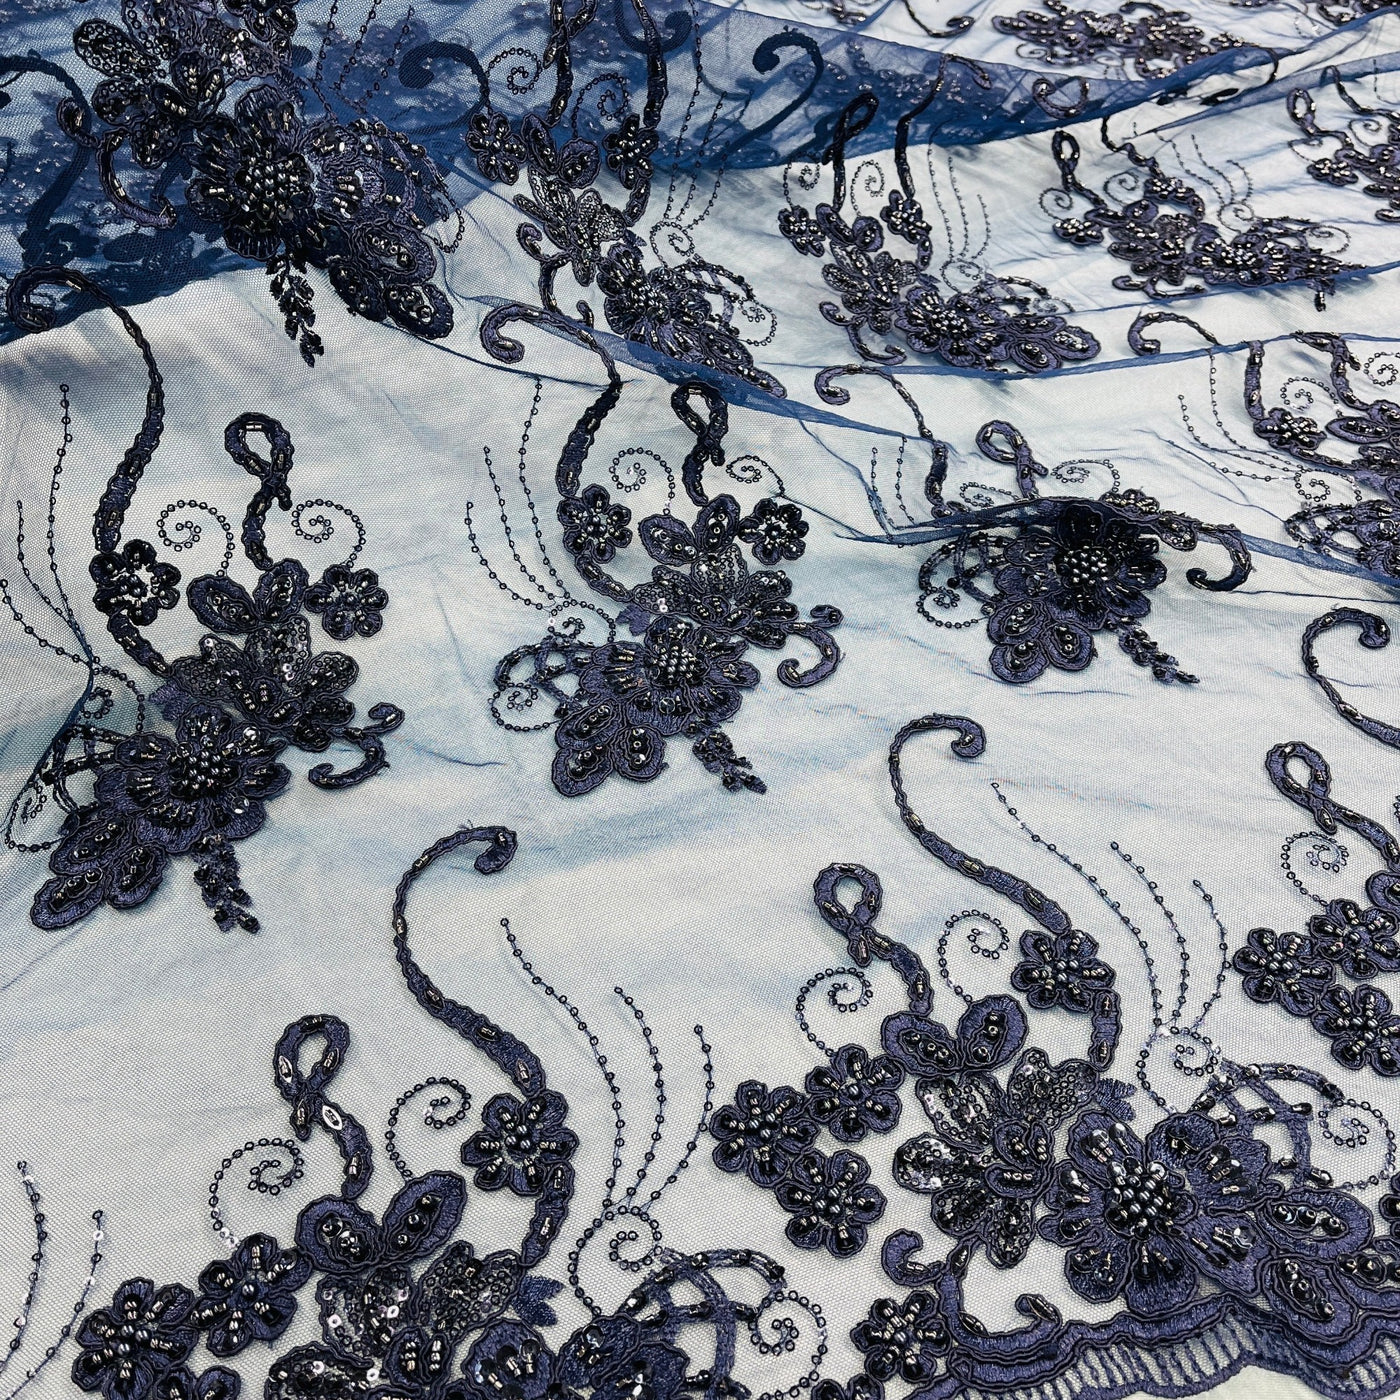 Beaded & Corded Lace Fabric Embroidered on 100% Polyester Net Mesh | Lace USA - GD-1807 Navy